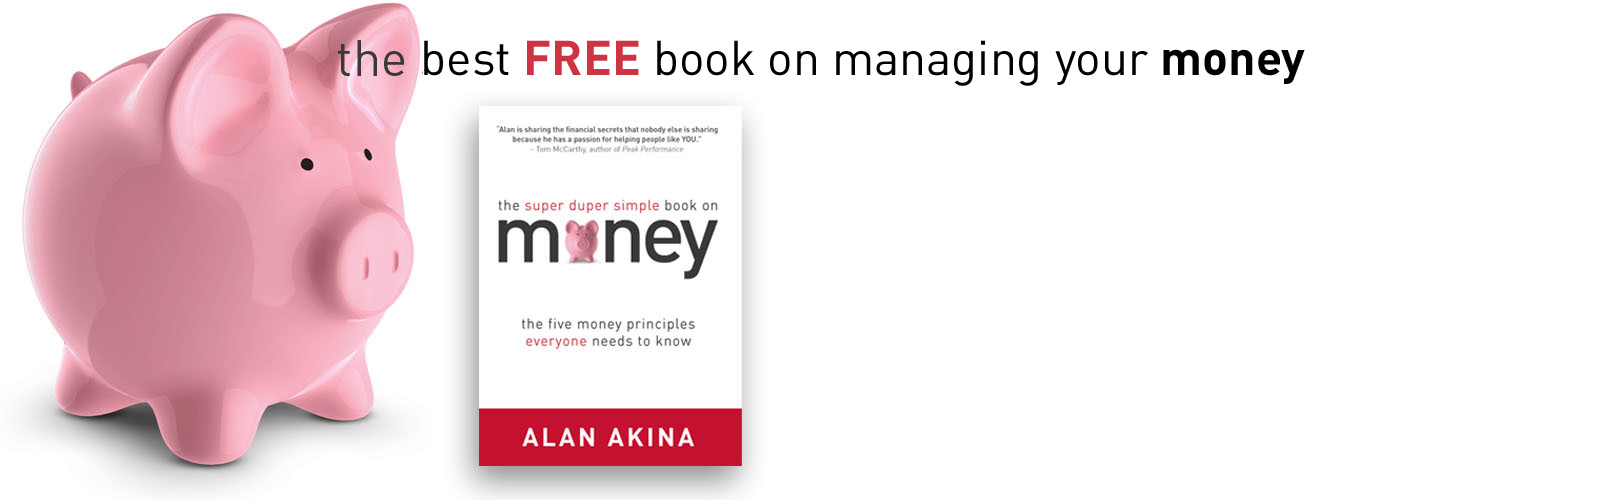 The Super Duper Simple Book on Money by Alan Akina. Official eBook launch coming May 1, 2012.